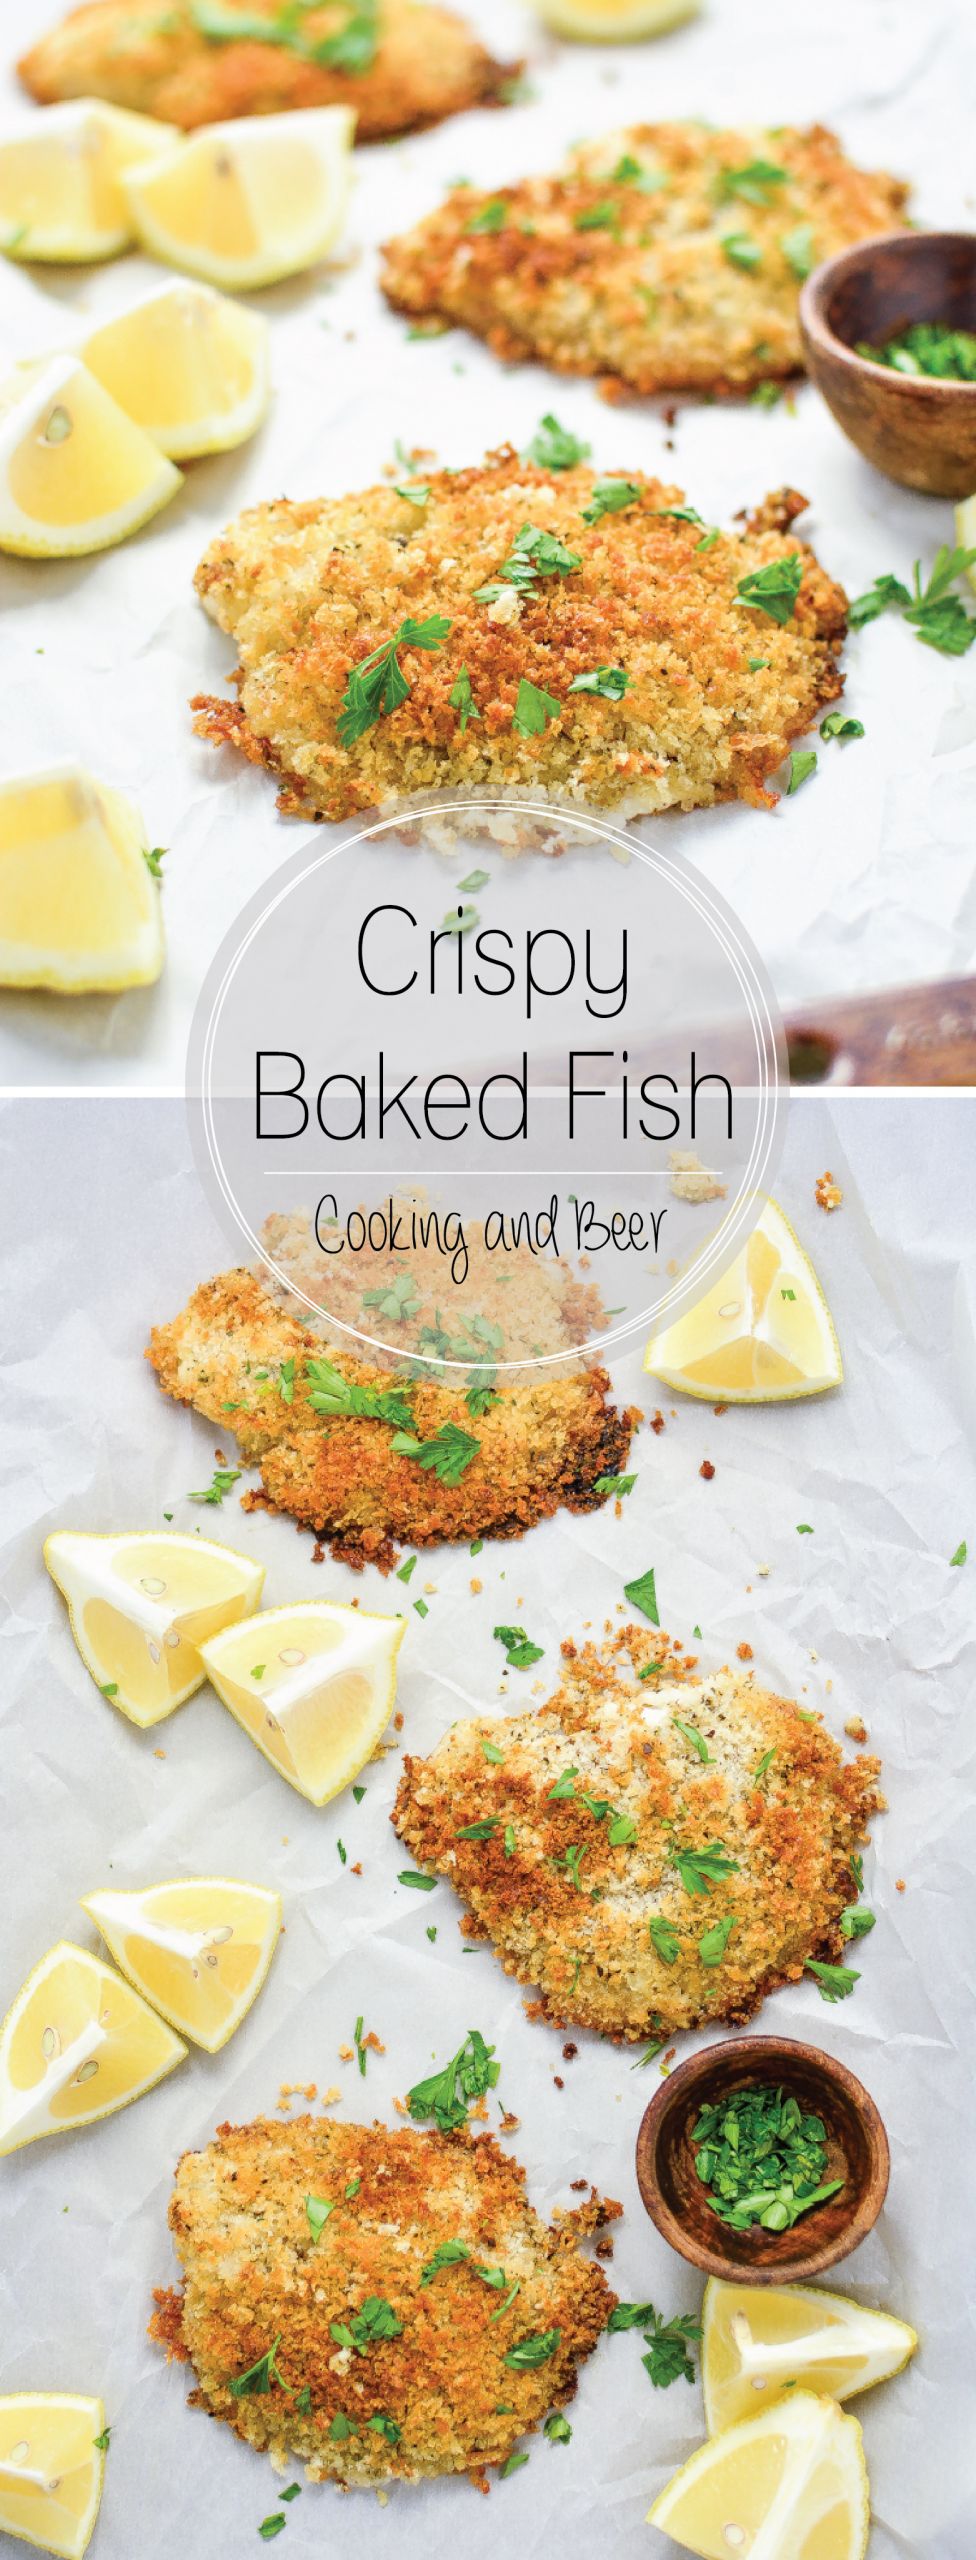 Crispy Baked Fish Recipes
 30 Minute Crispy Baked FishCooking and Beer